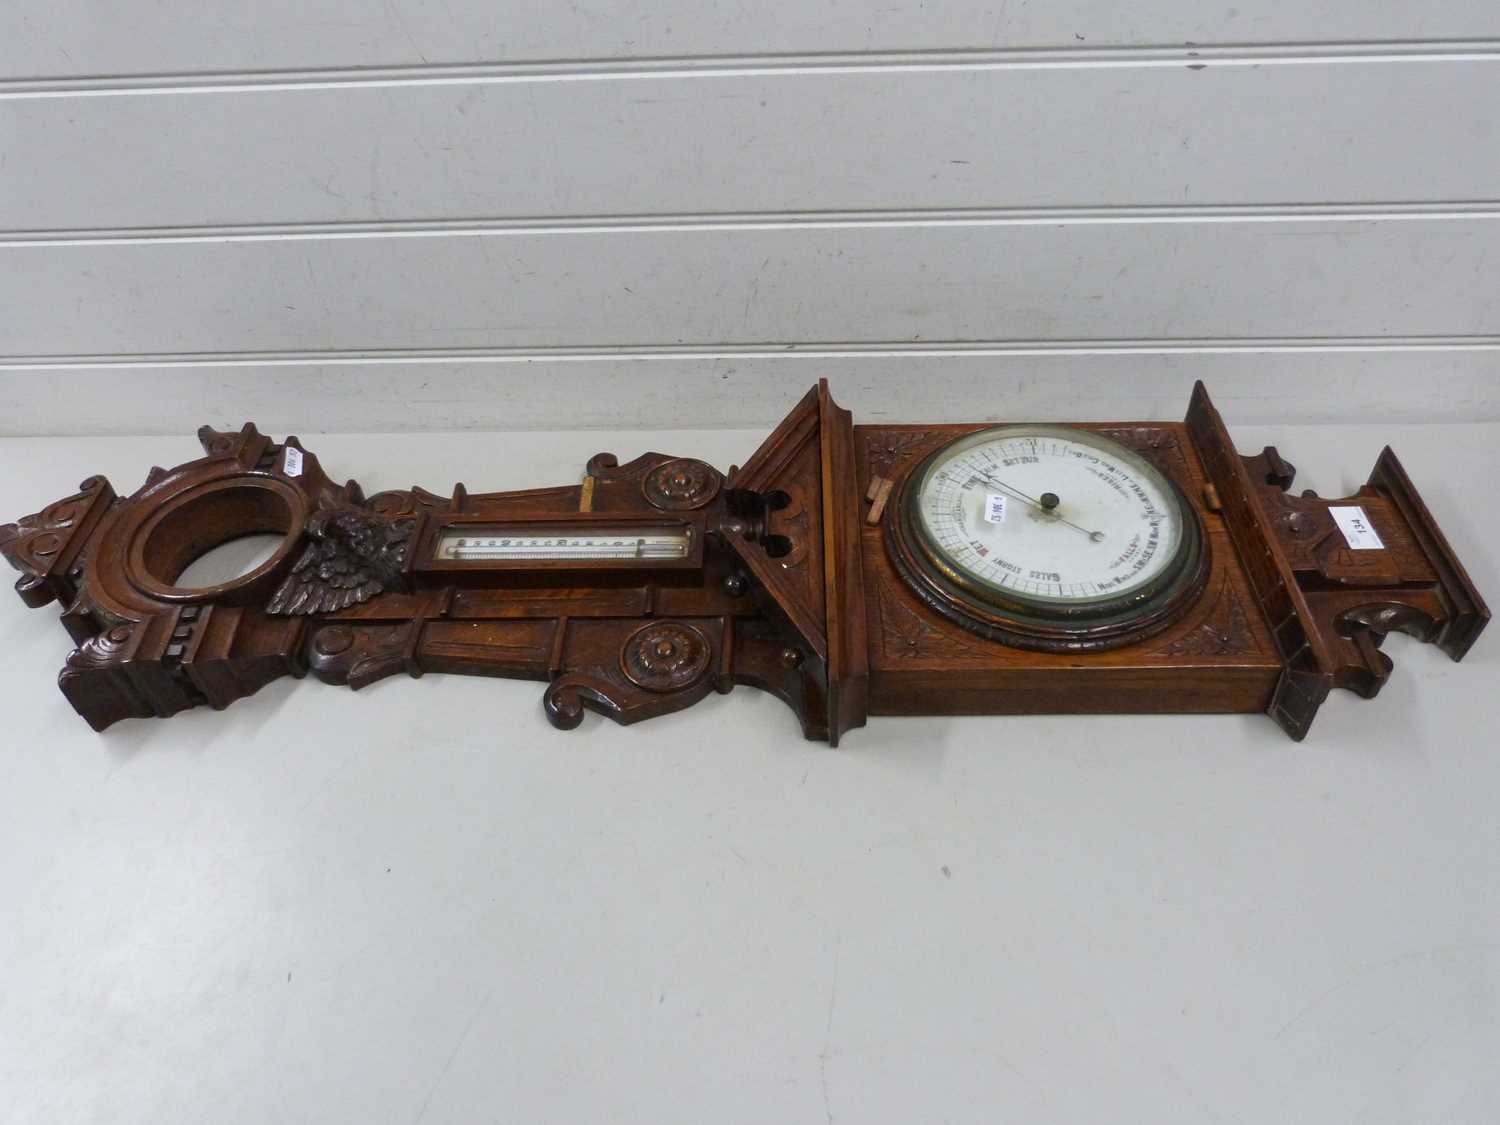 A large and elaborate late 19th Century barometer and thermometer set in a heavily carved case (a/